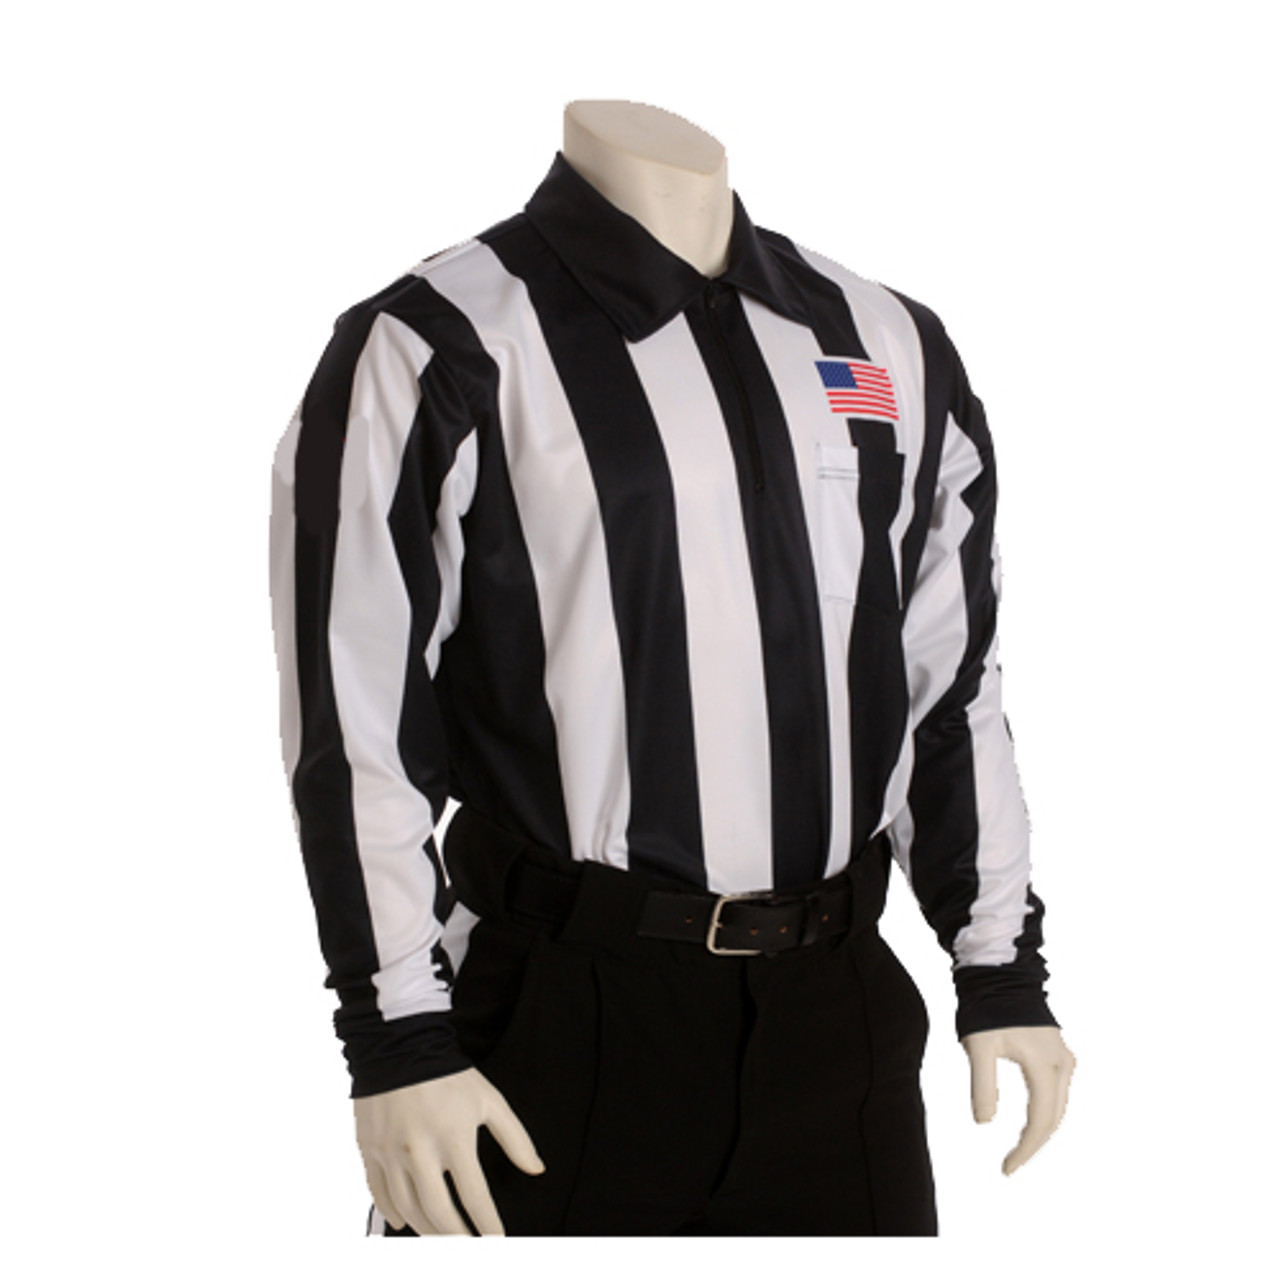 Mens Football Referee Shirt $39.09 embroidered with COB logo Could;t find a  blue and white stripe